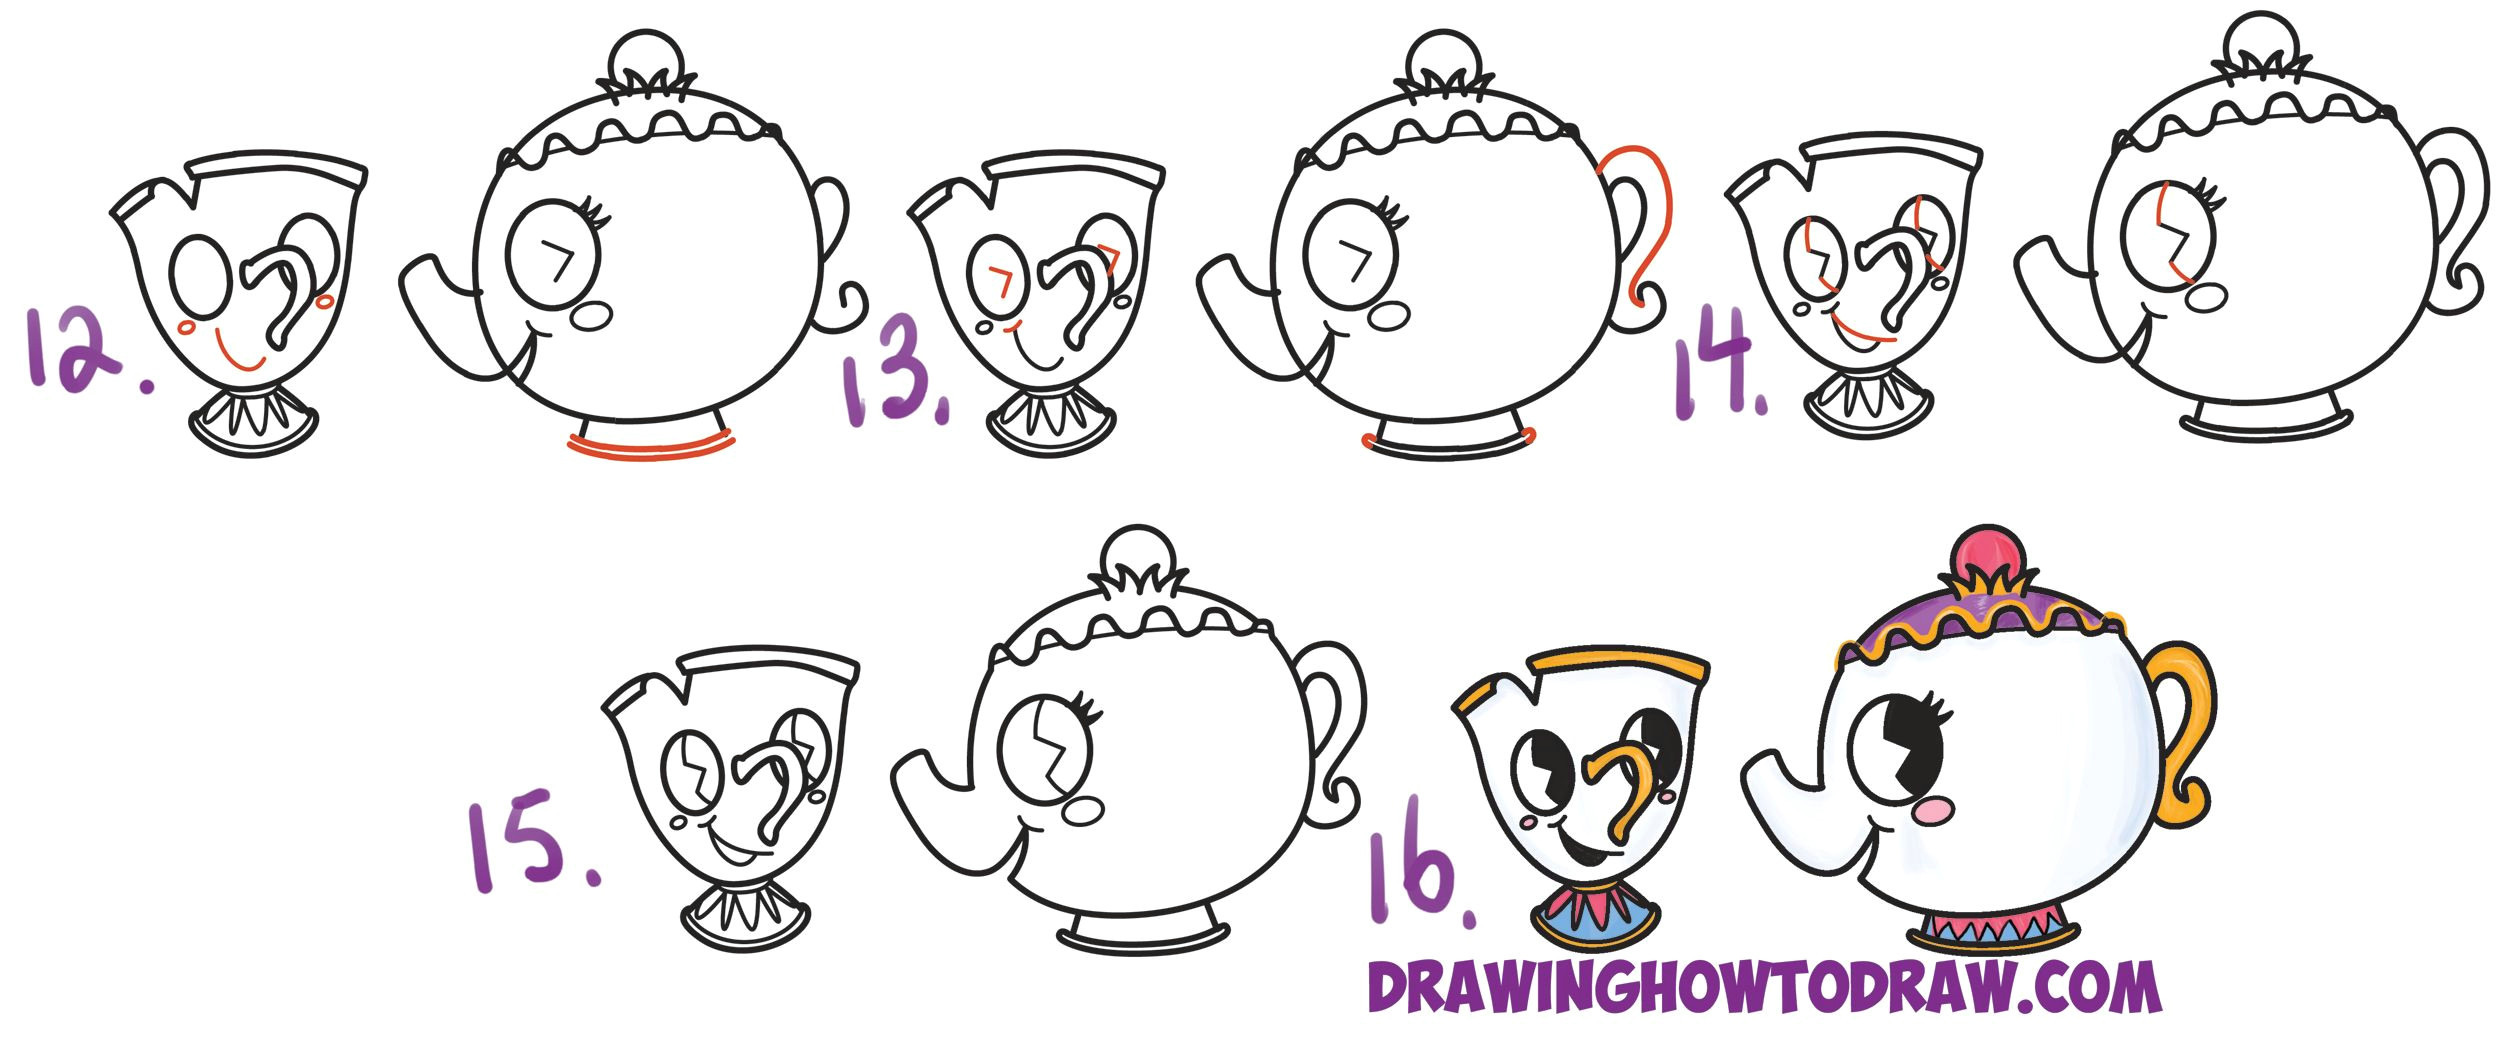 Easy Drawing Disney Princess How to Draw Cute Kawaii Chibi Mrs Potts and Chip From Beauty and